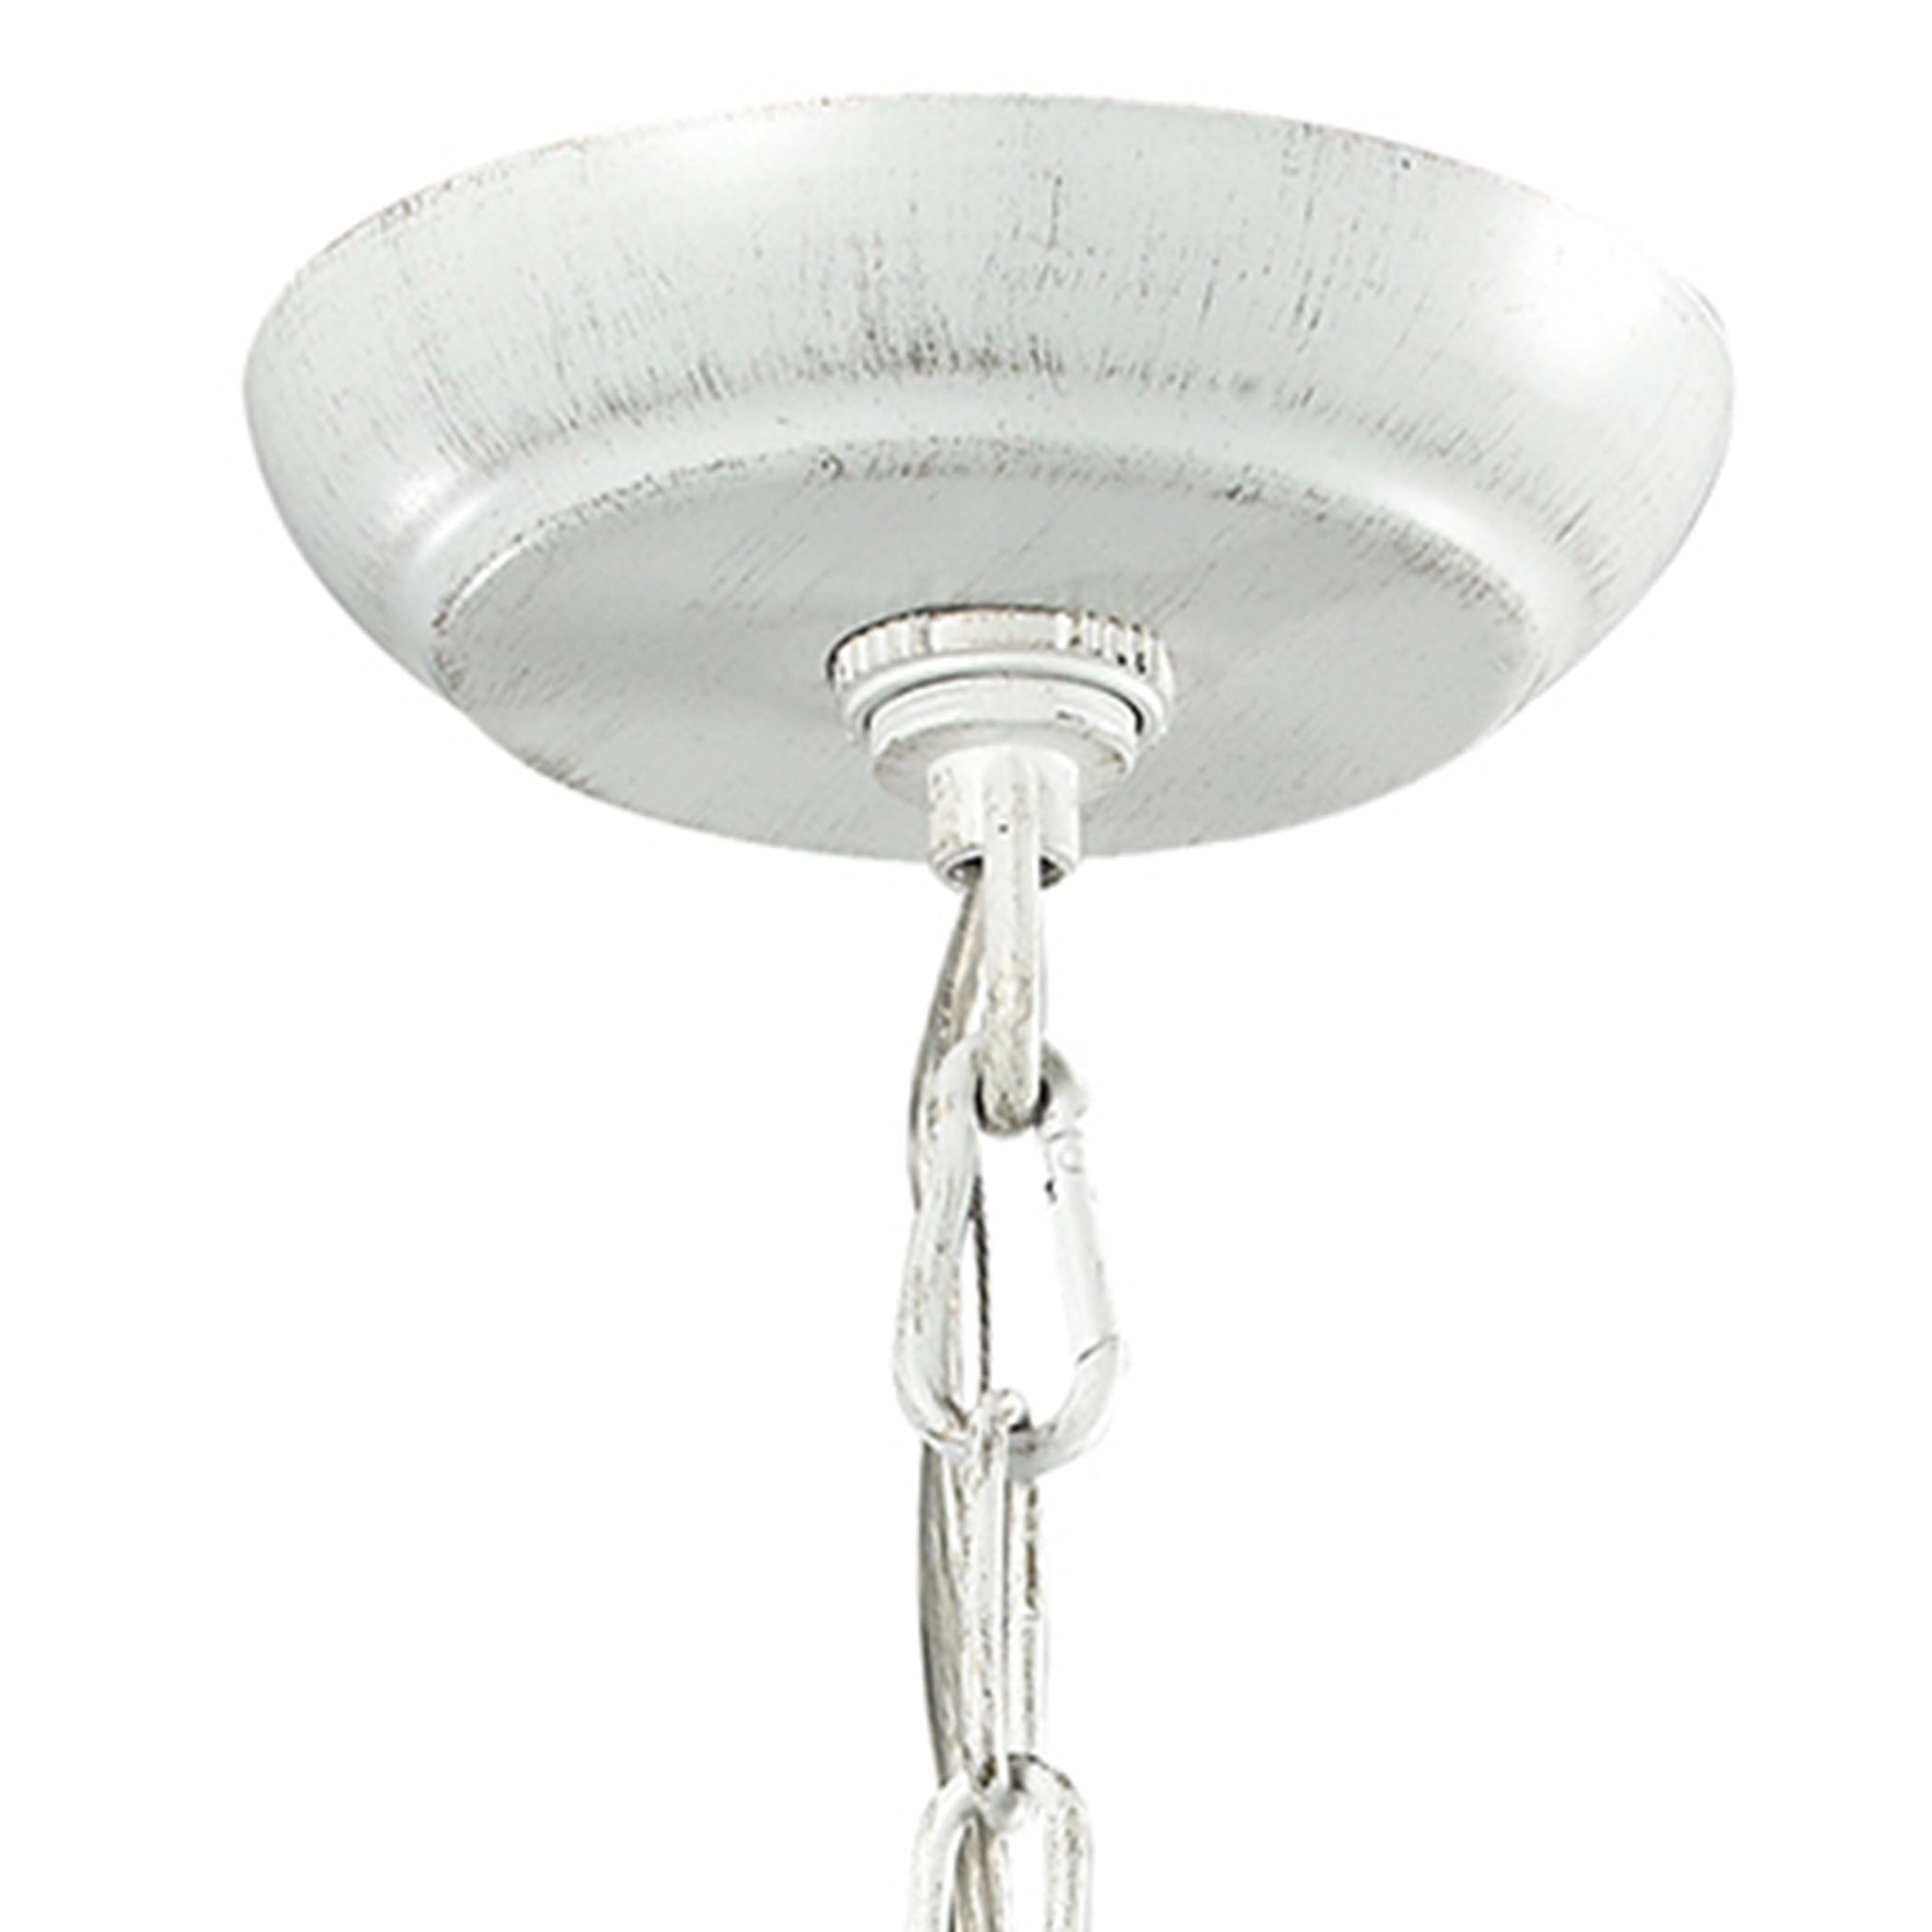 ELK Lighting 18123/1 Circeo 1-Light Mini Pendant in Antique White with Crystal